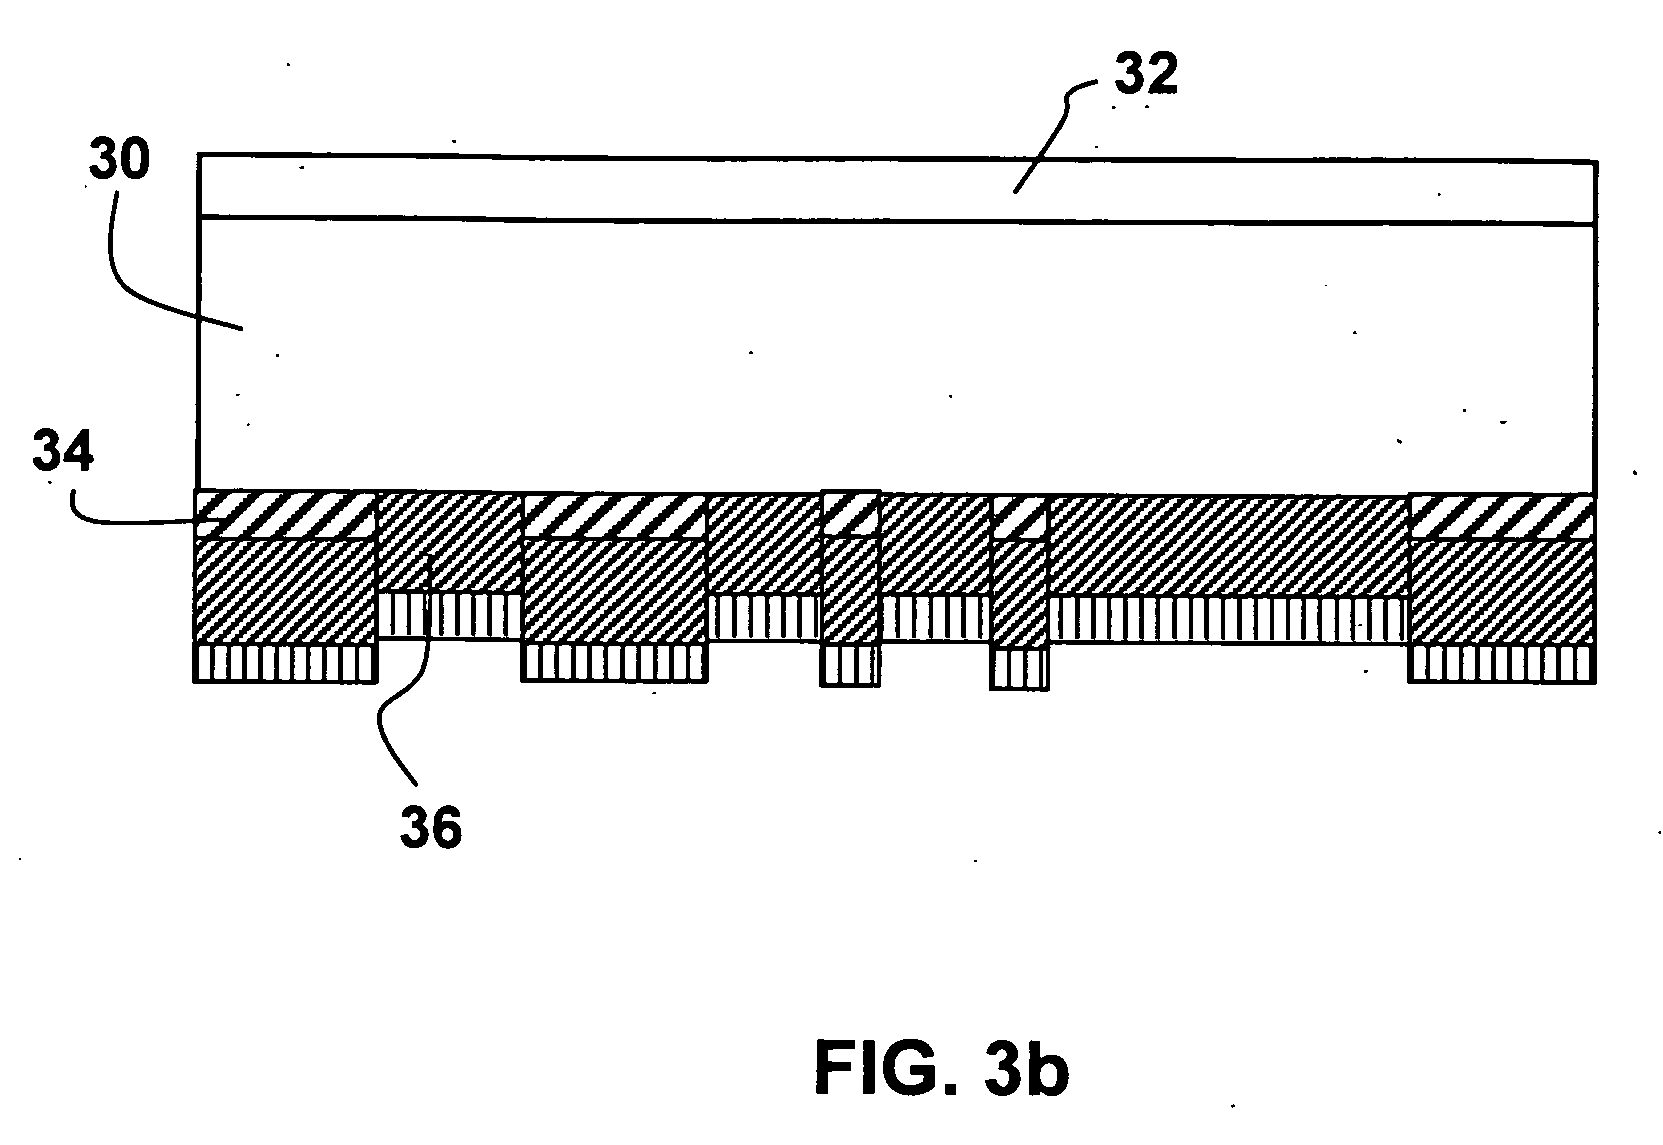 Vacuum roll coated security thin film interference products with overt and/or covert patterned layers